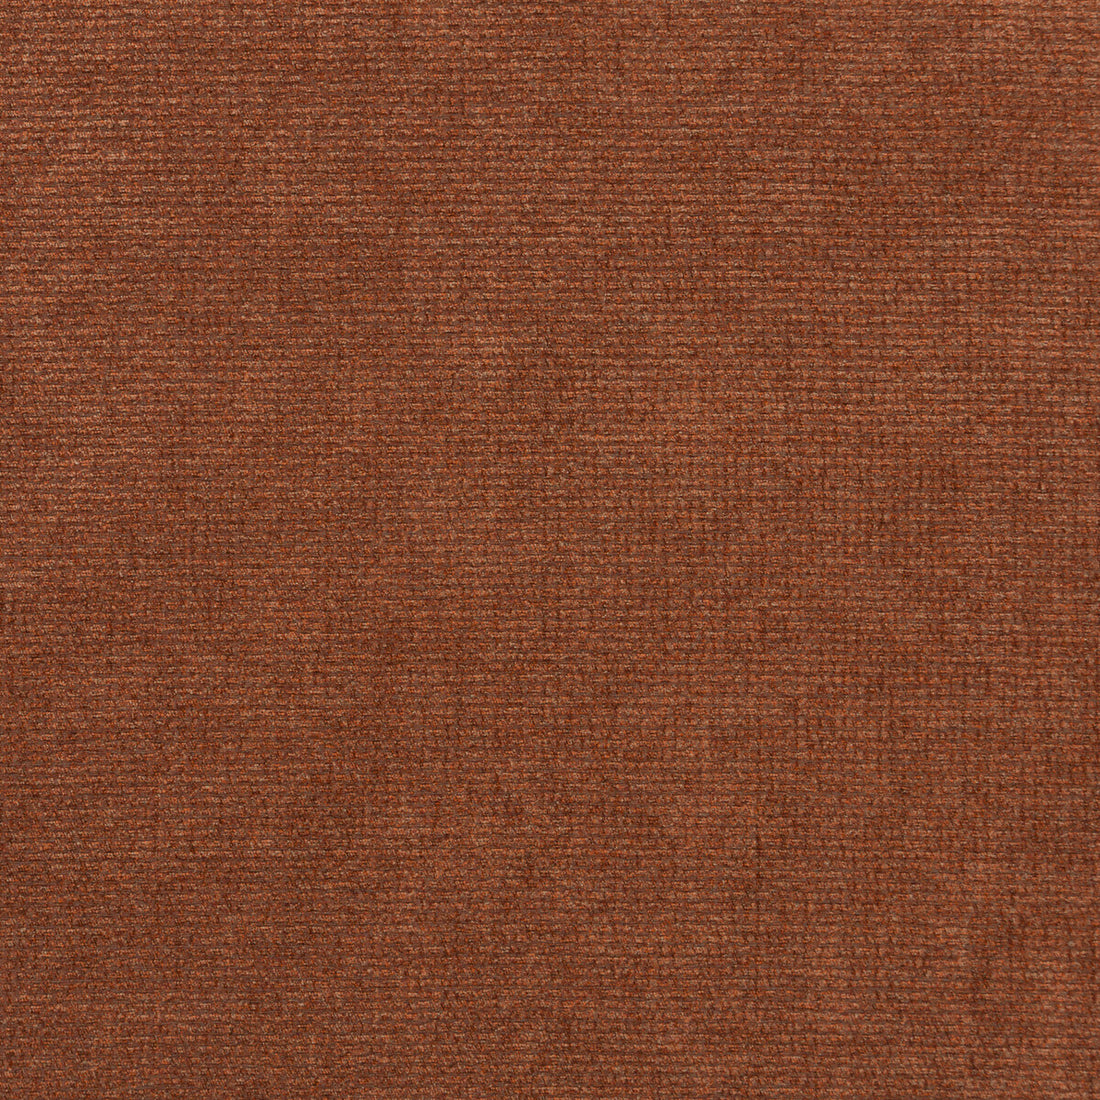 Matrix fabric in spice color - pattern BF10686.330.0 - by G P &amp; J Baker in the Essential Colours collection